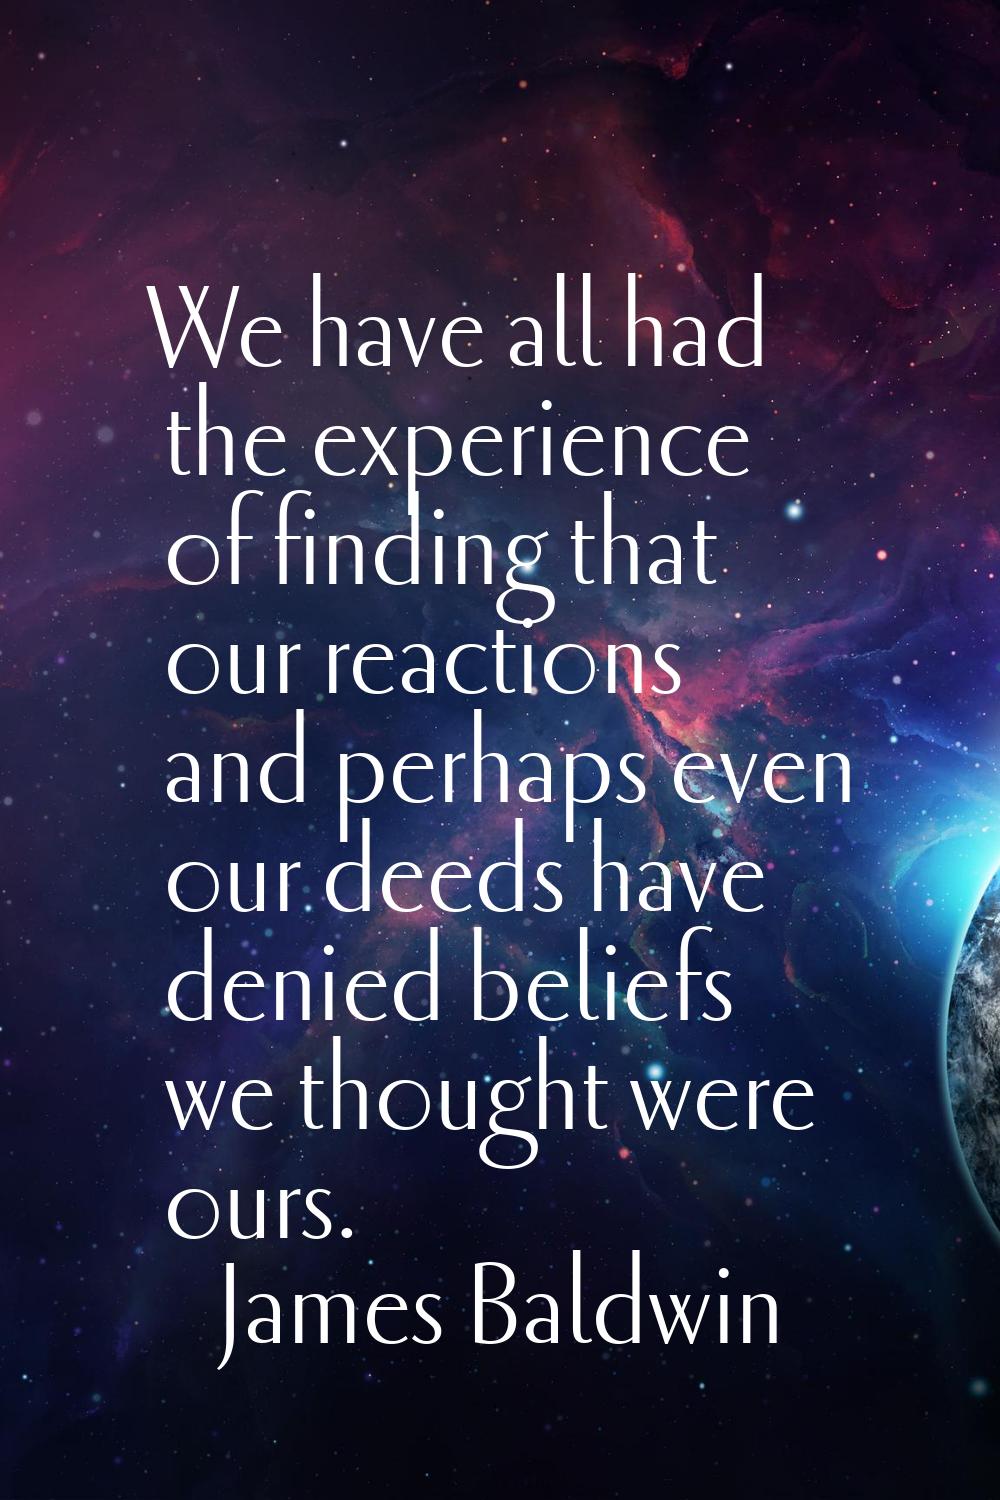 We have all had the experience of finding that our reactions and perhaps even our deeds have denied